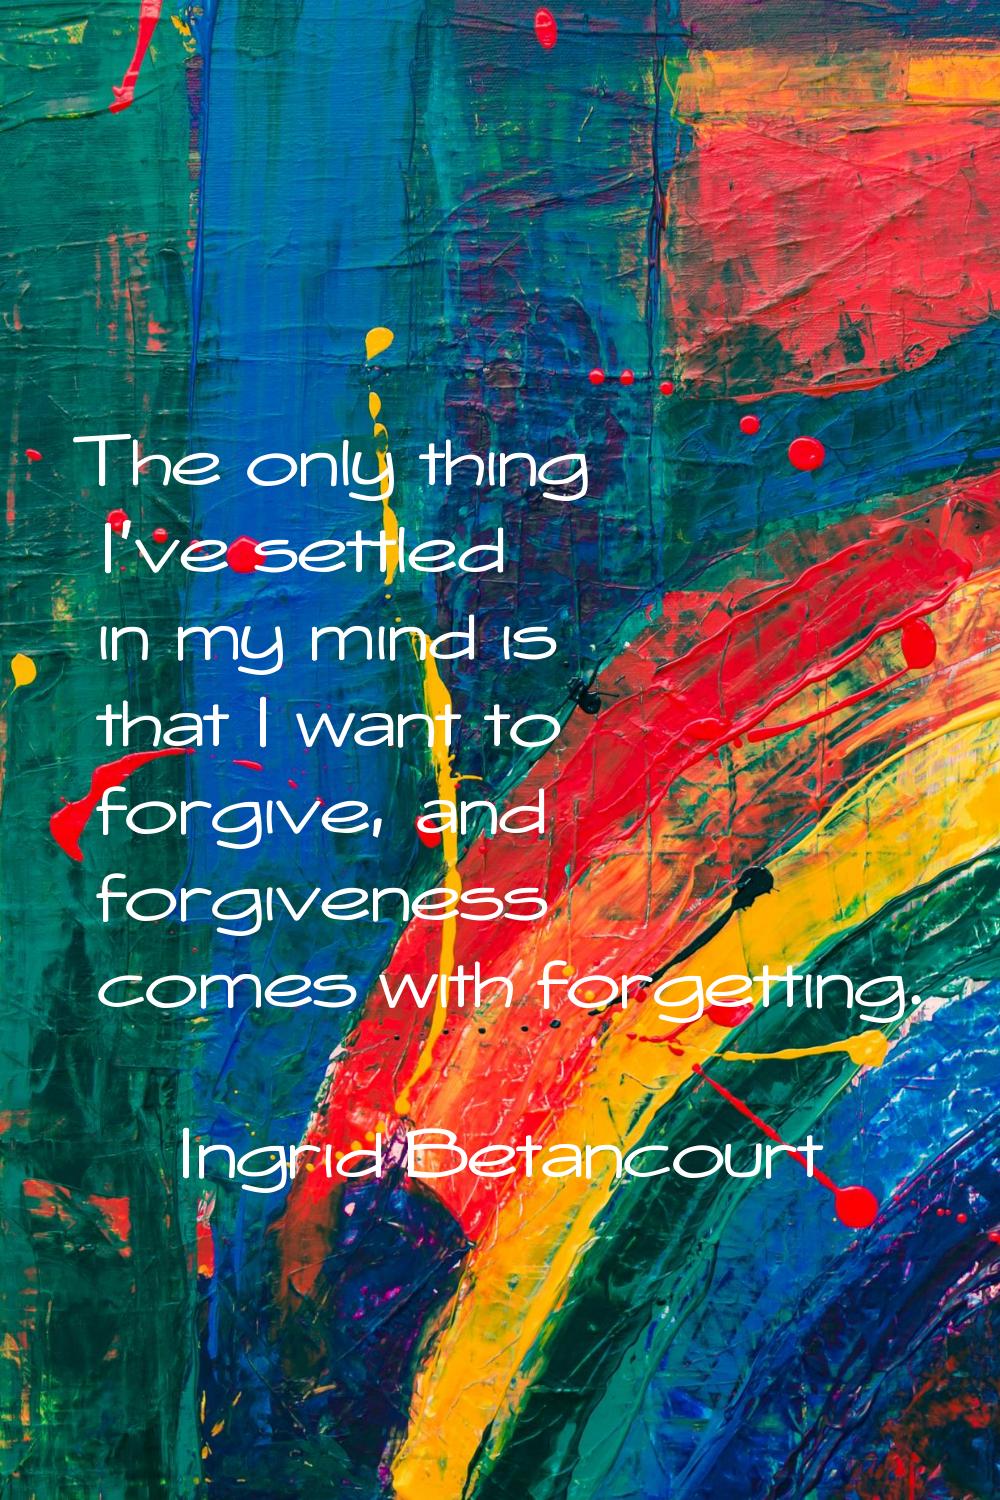 The only thing I've settled in my mind is that I want to forgive, and forgiveness comes with forget